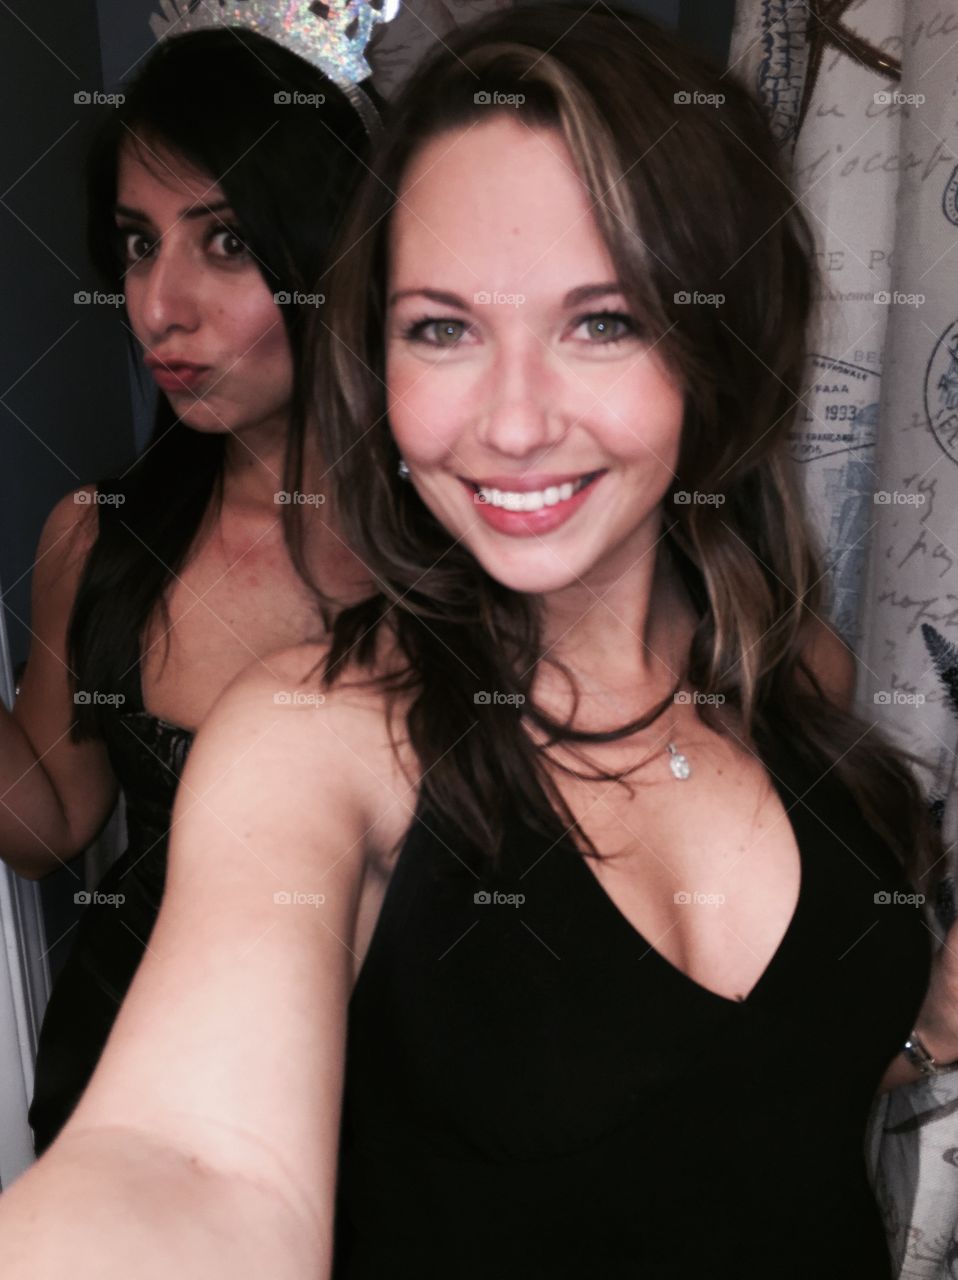 Gorgeous young girl with friend taking selfie